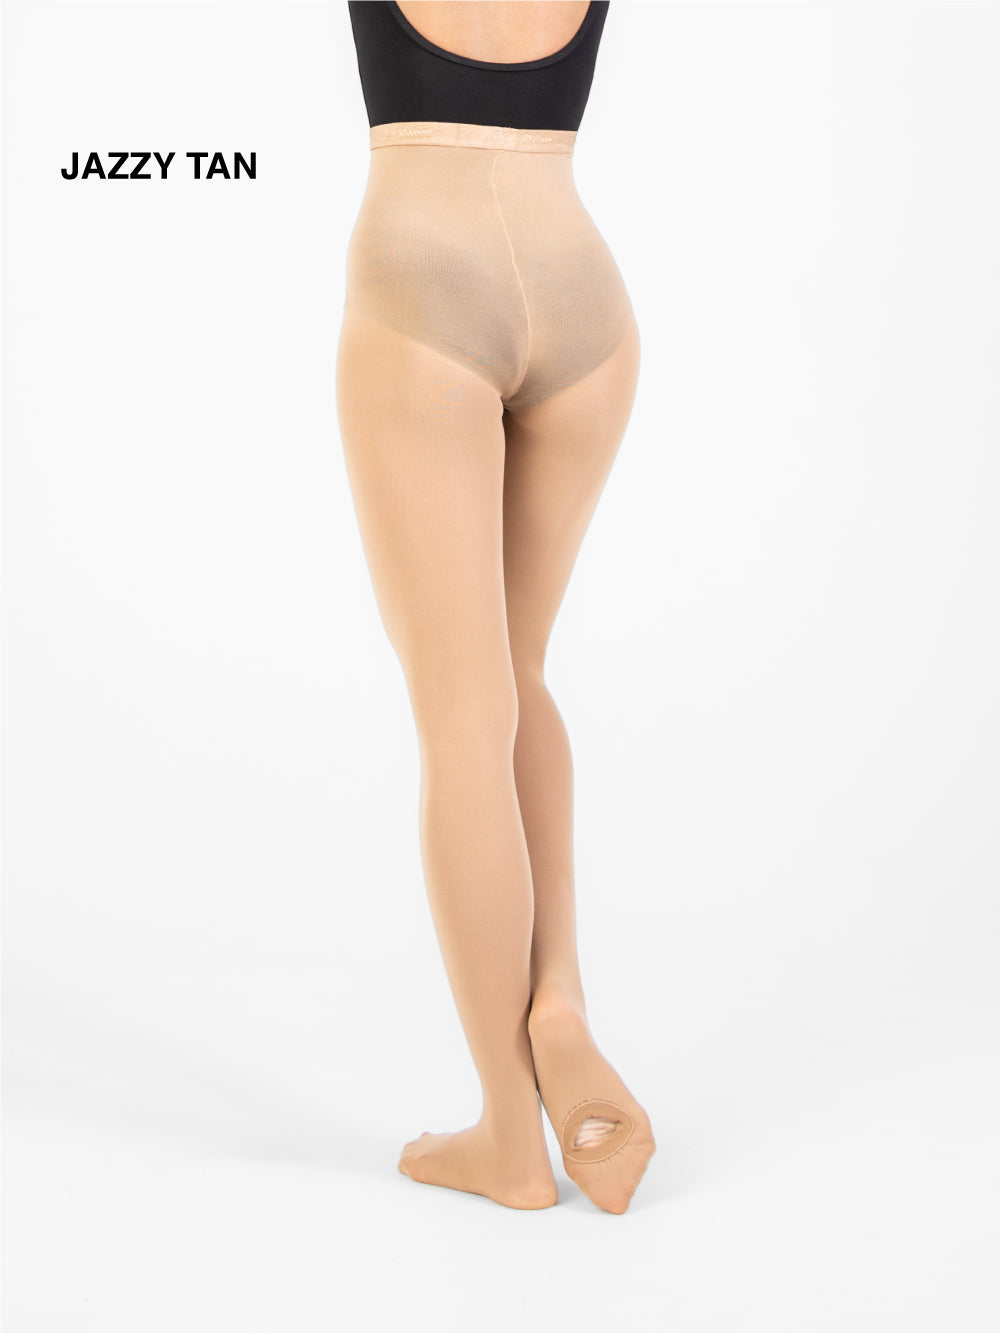 Dance Tights TAN / SKIN TONE CONVERTIBLE For Jazz & Tap Tod to XL